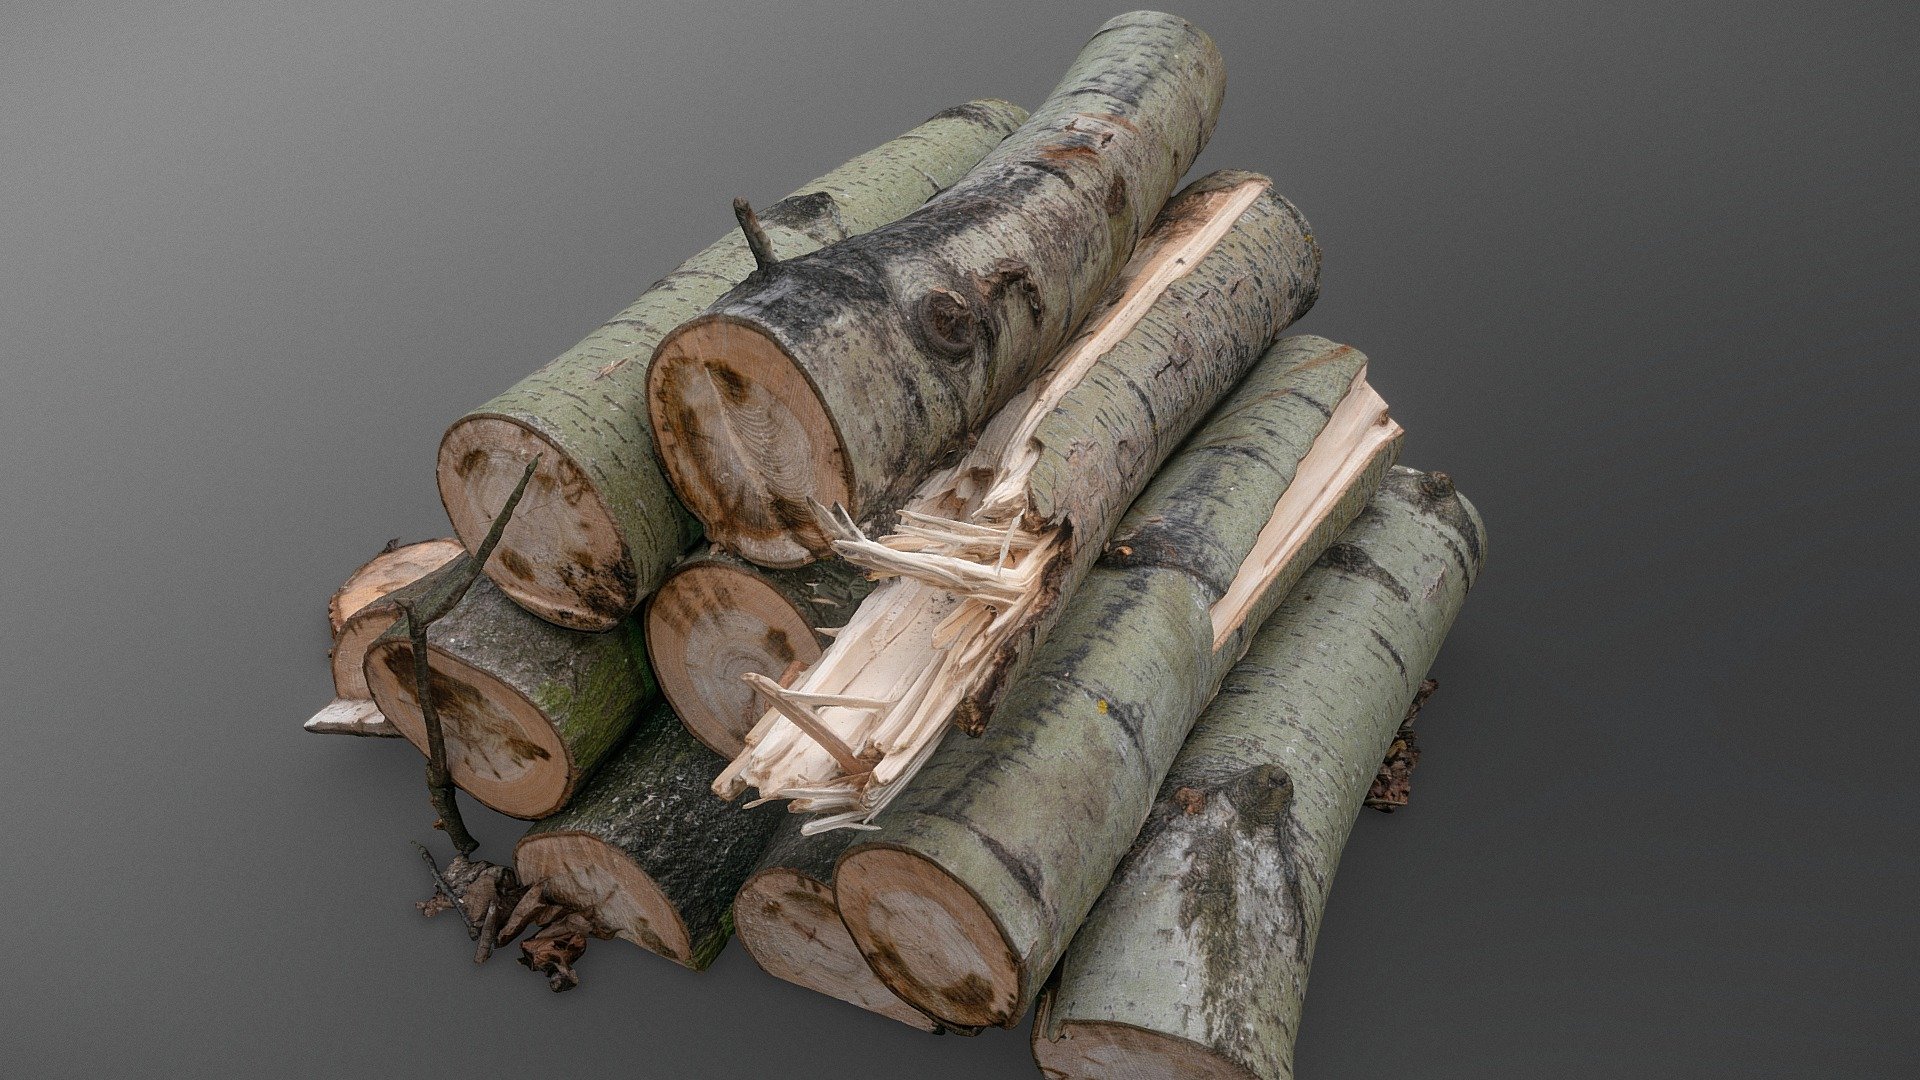 Cut sawed ashtree logs wood lumber stack pile heap in forest clearing

On demand unlimited worldwide license

photogrammetry scan (220x36mp), 2x16k textures - Cut ashree logs stack - on demand license - Buy Royalty Free 3D model by matousekfoto 3d model